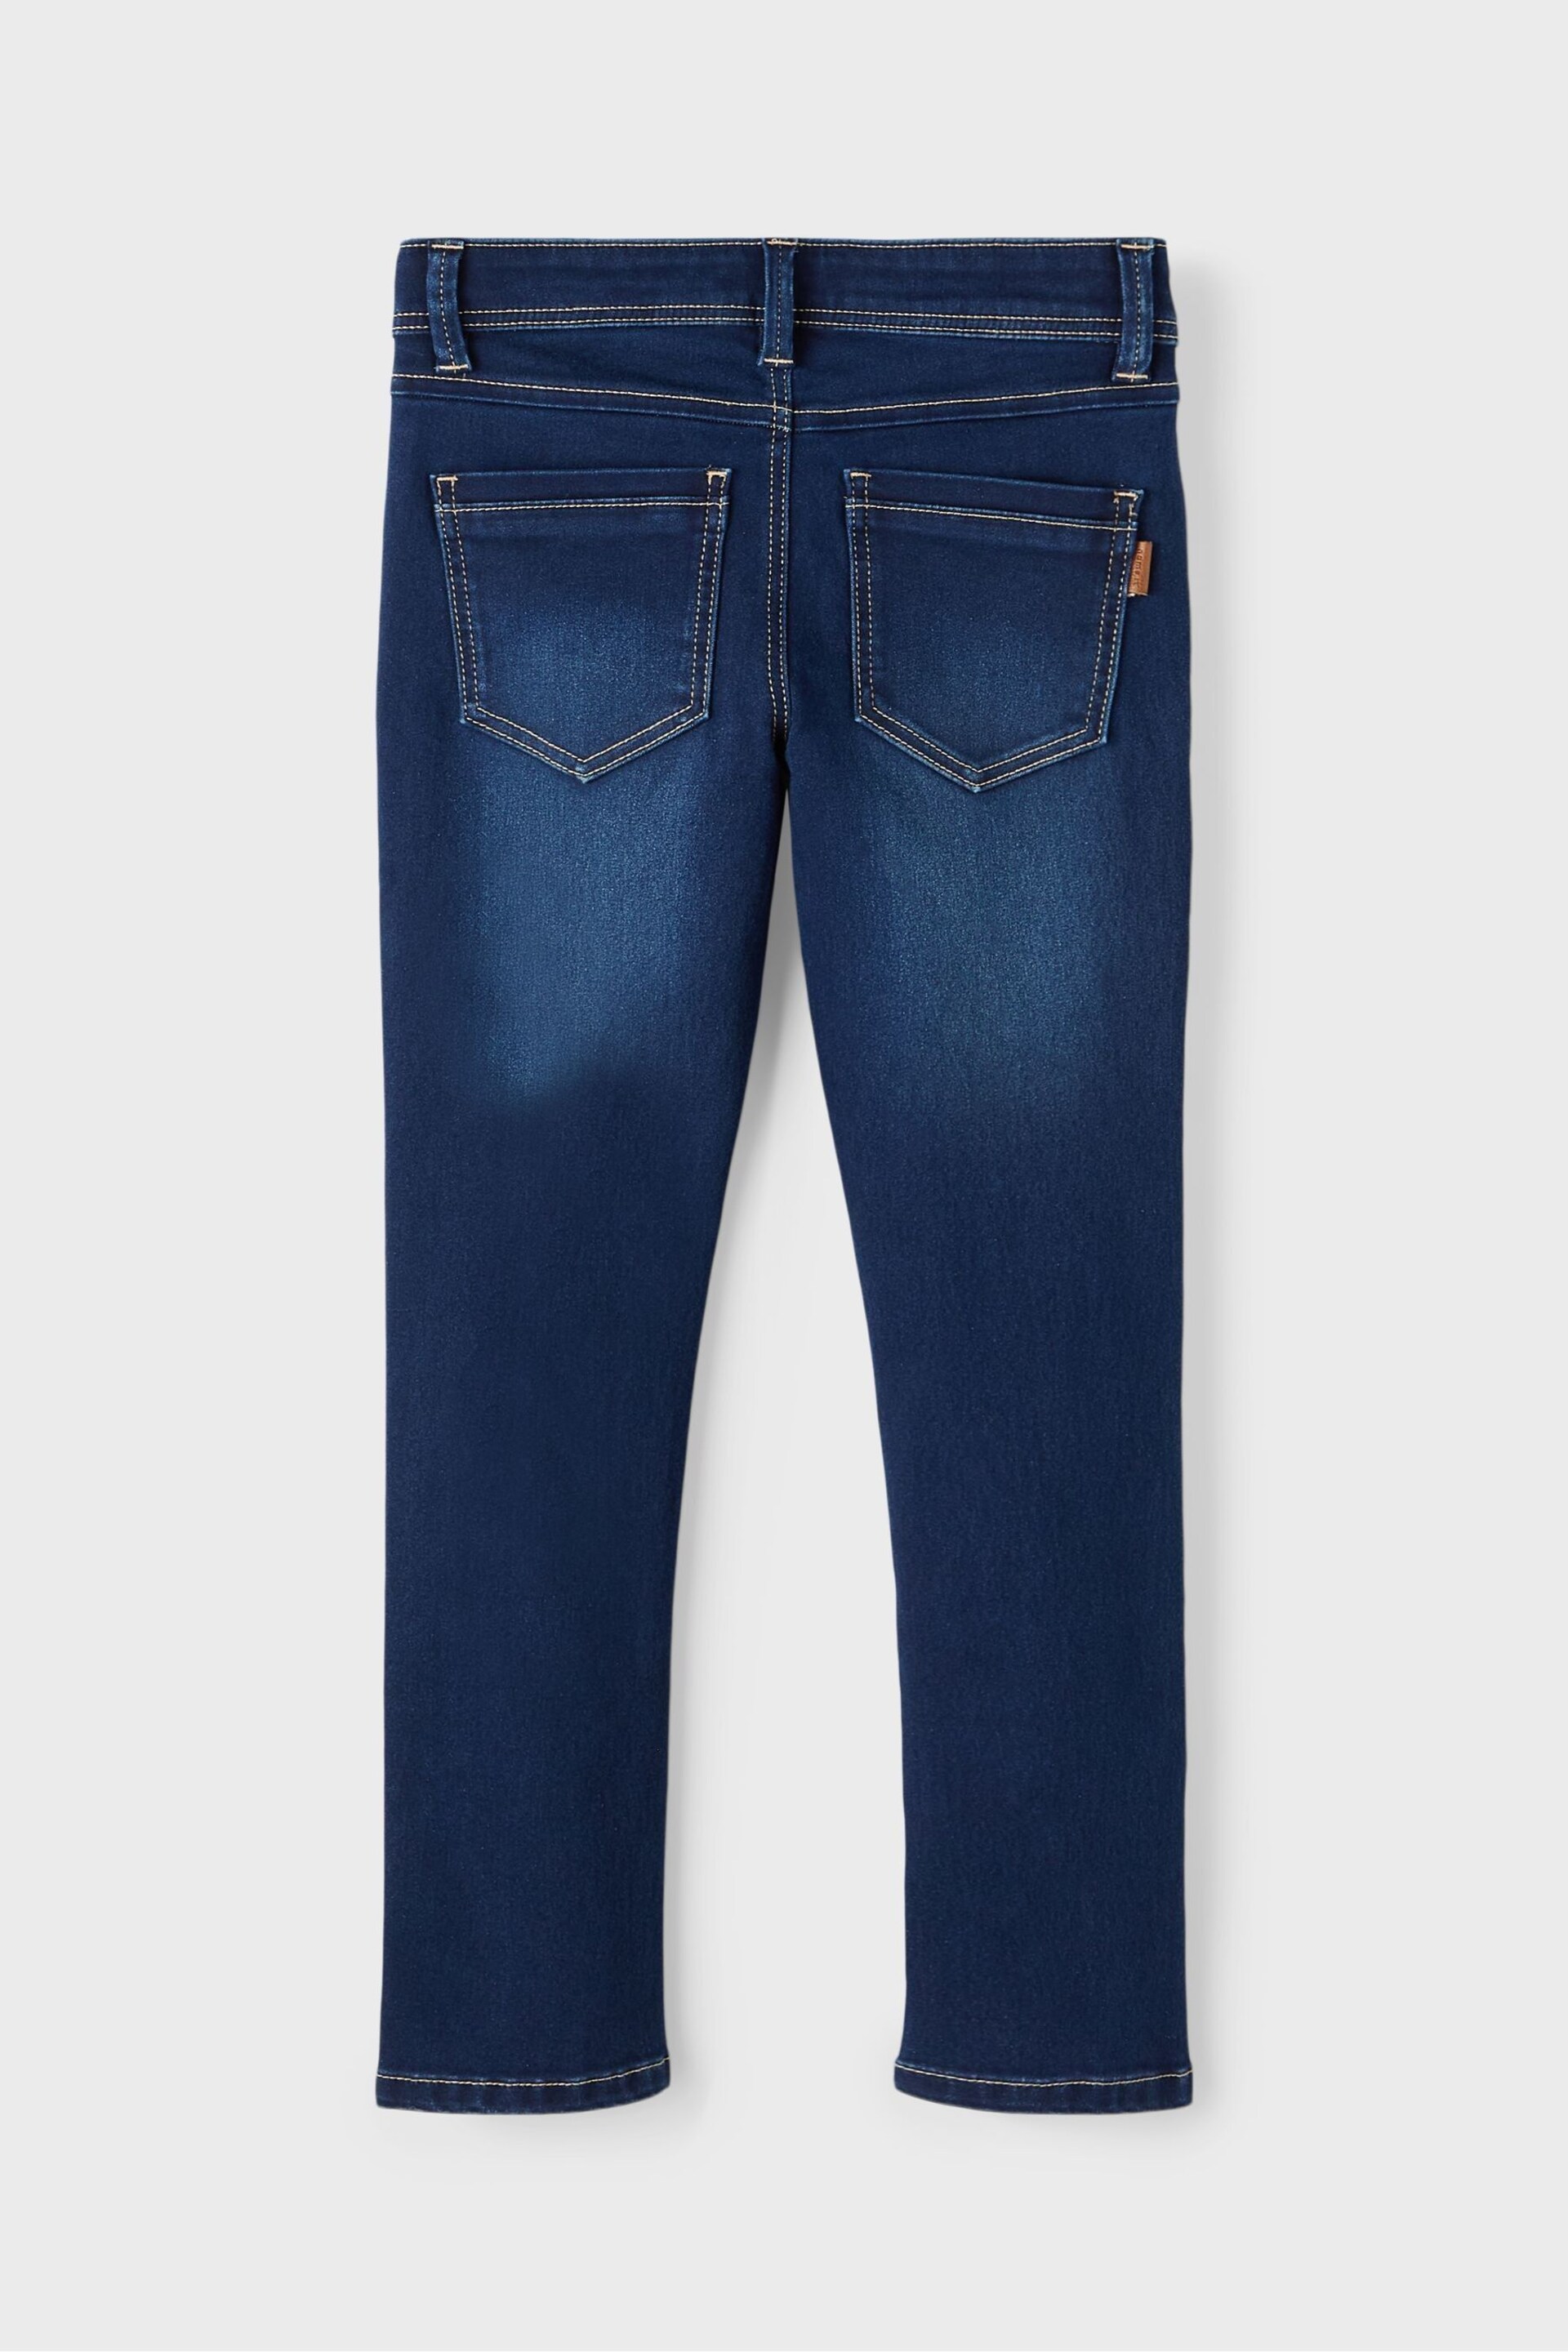 Name It Blue Skinny Jeans - Image 4 of 6